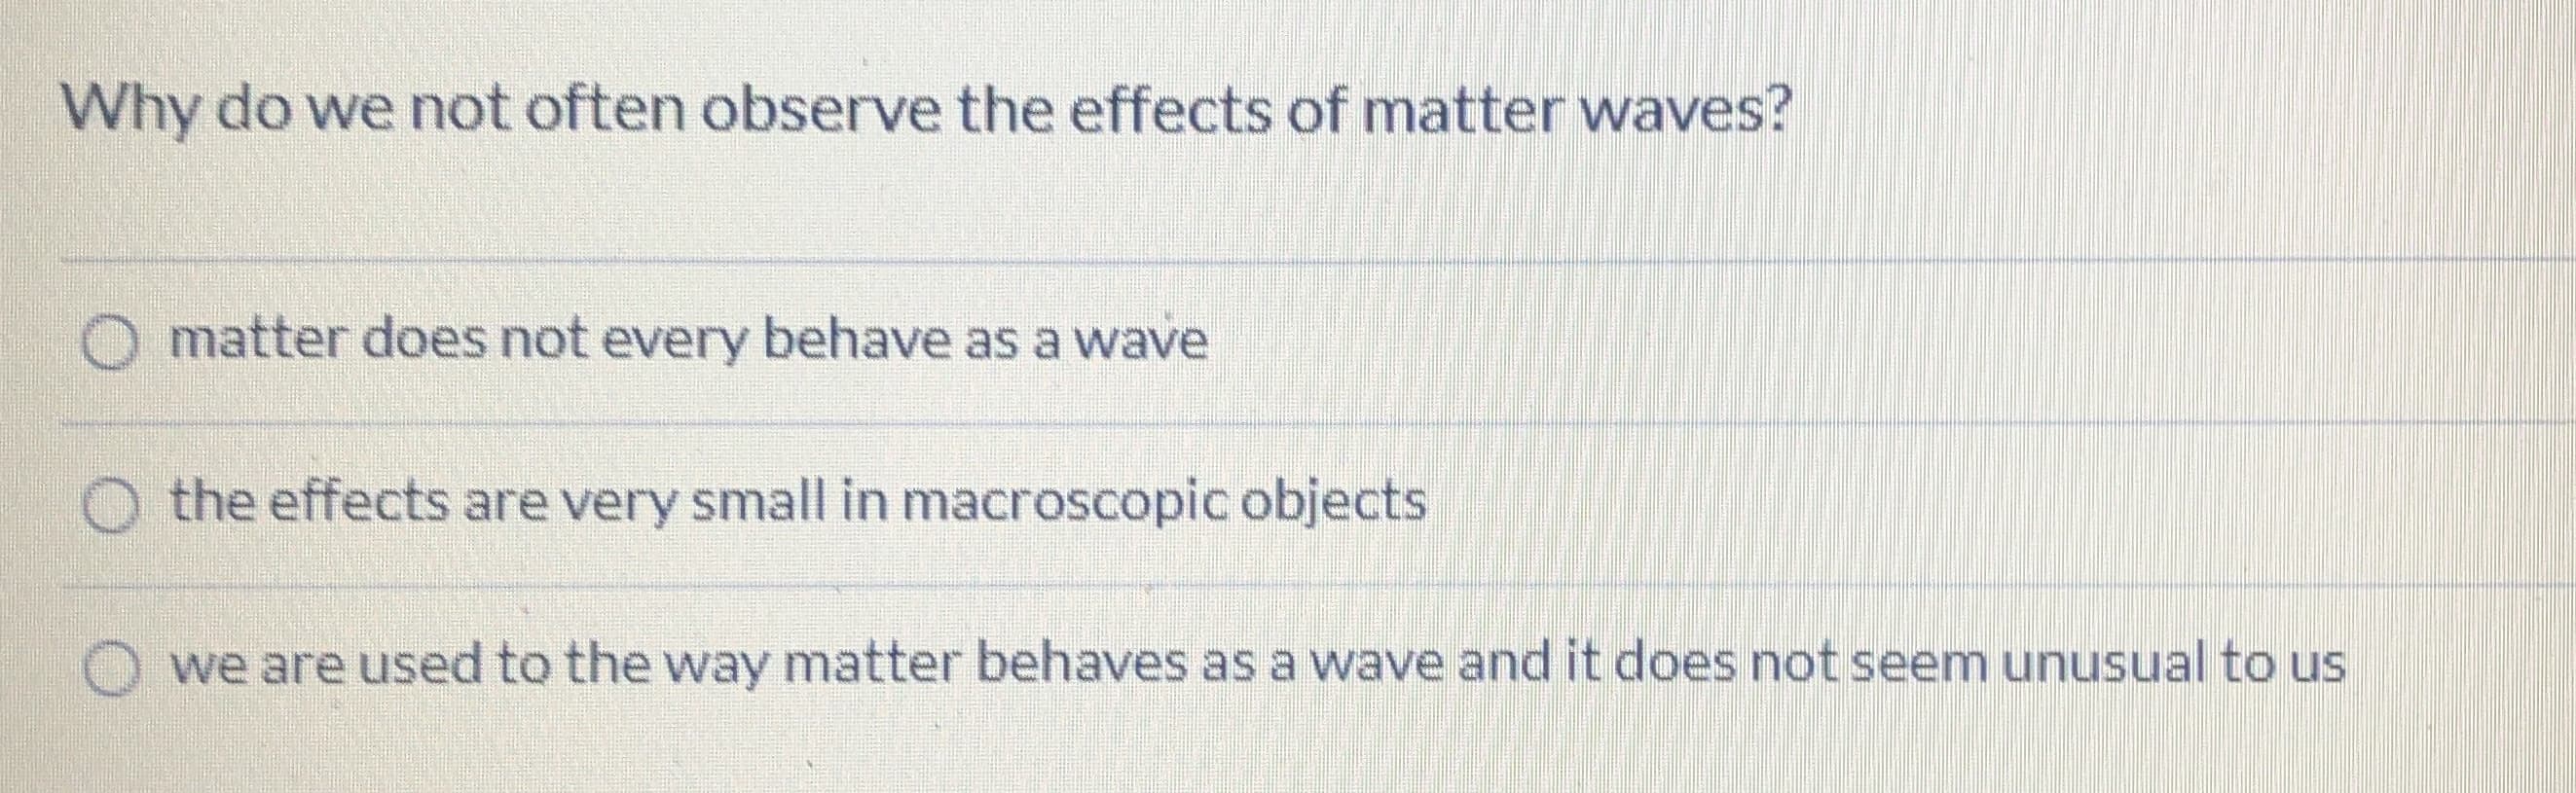 Why do we not often observe the effects of matter waves?
O matter does not every behave as a wave
O the effects are very small in macroscopic objects
we are used to the way matter behaves as a wave and it does not seem unusual to us
